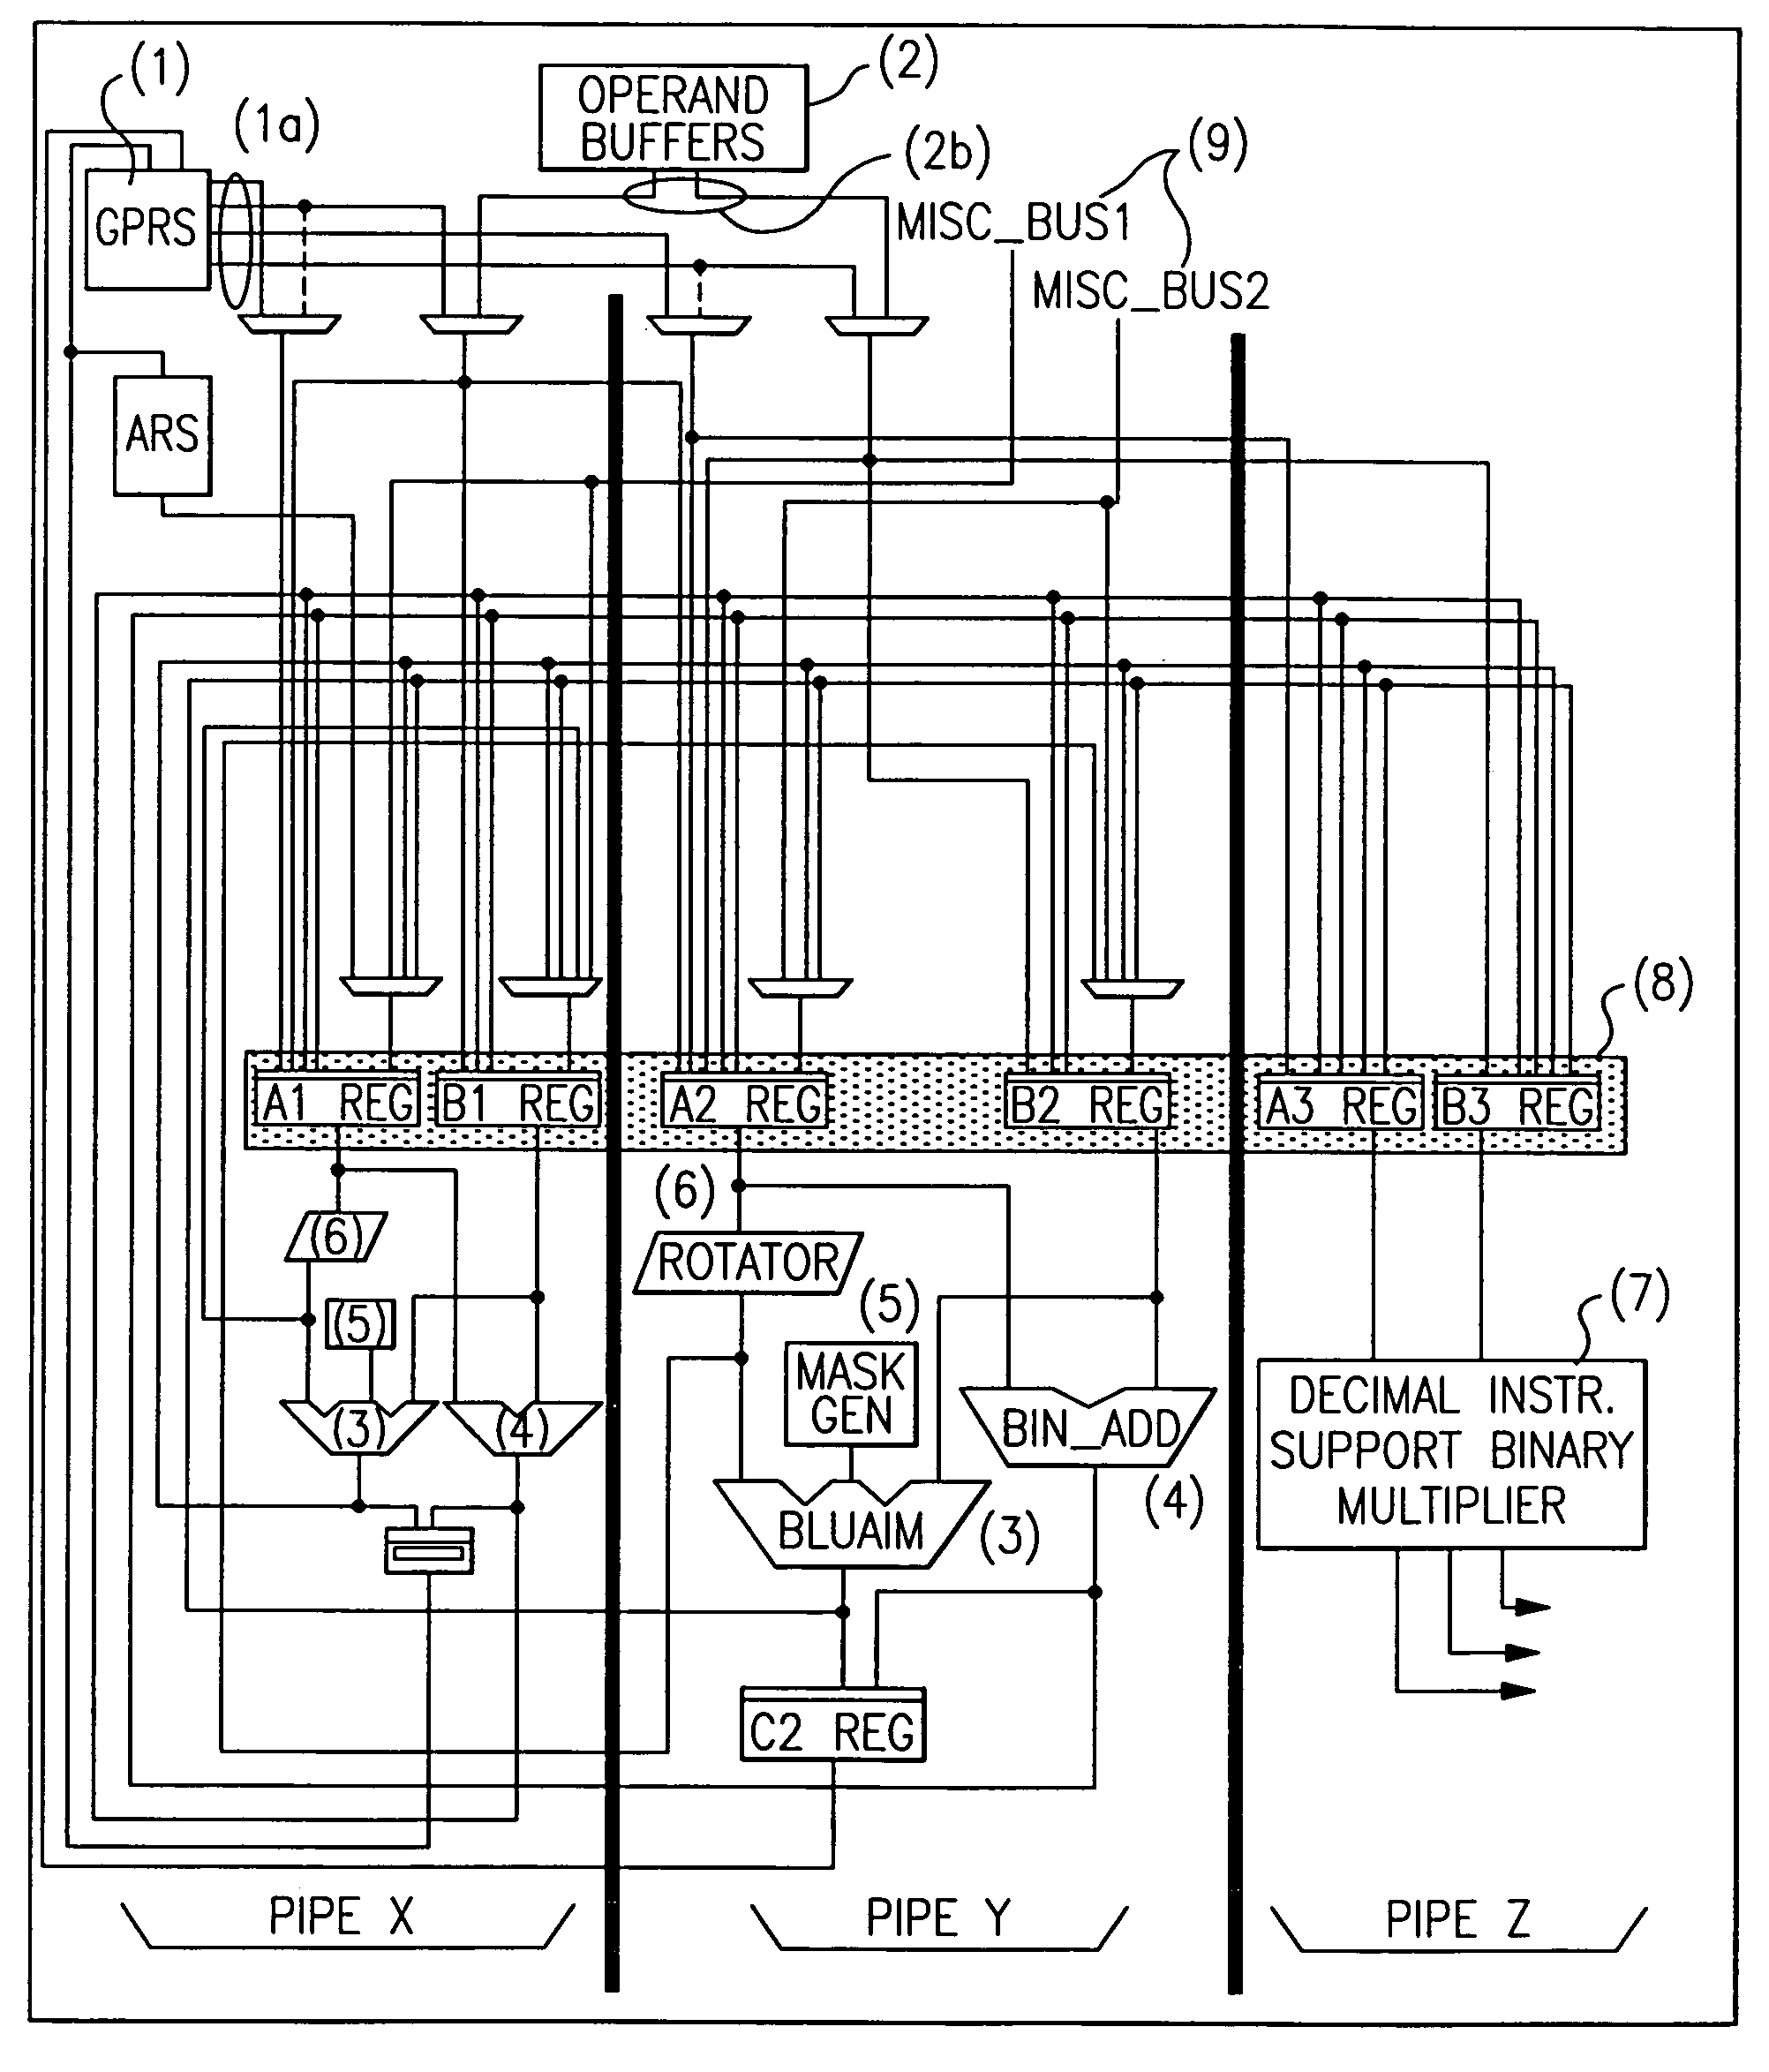 Superscalar microprocessor having multi-pipe dispatch and execution unit